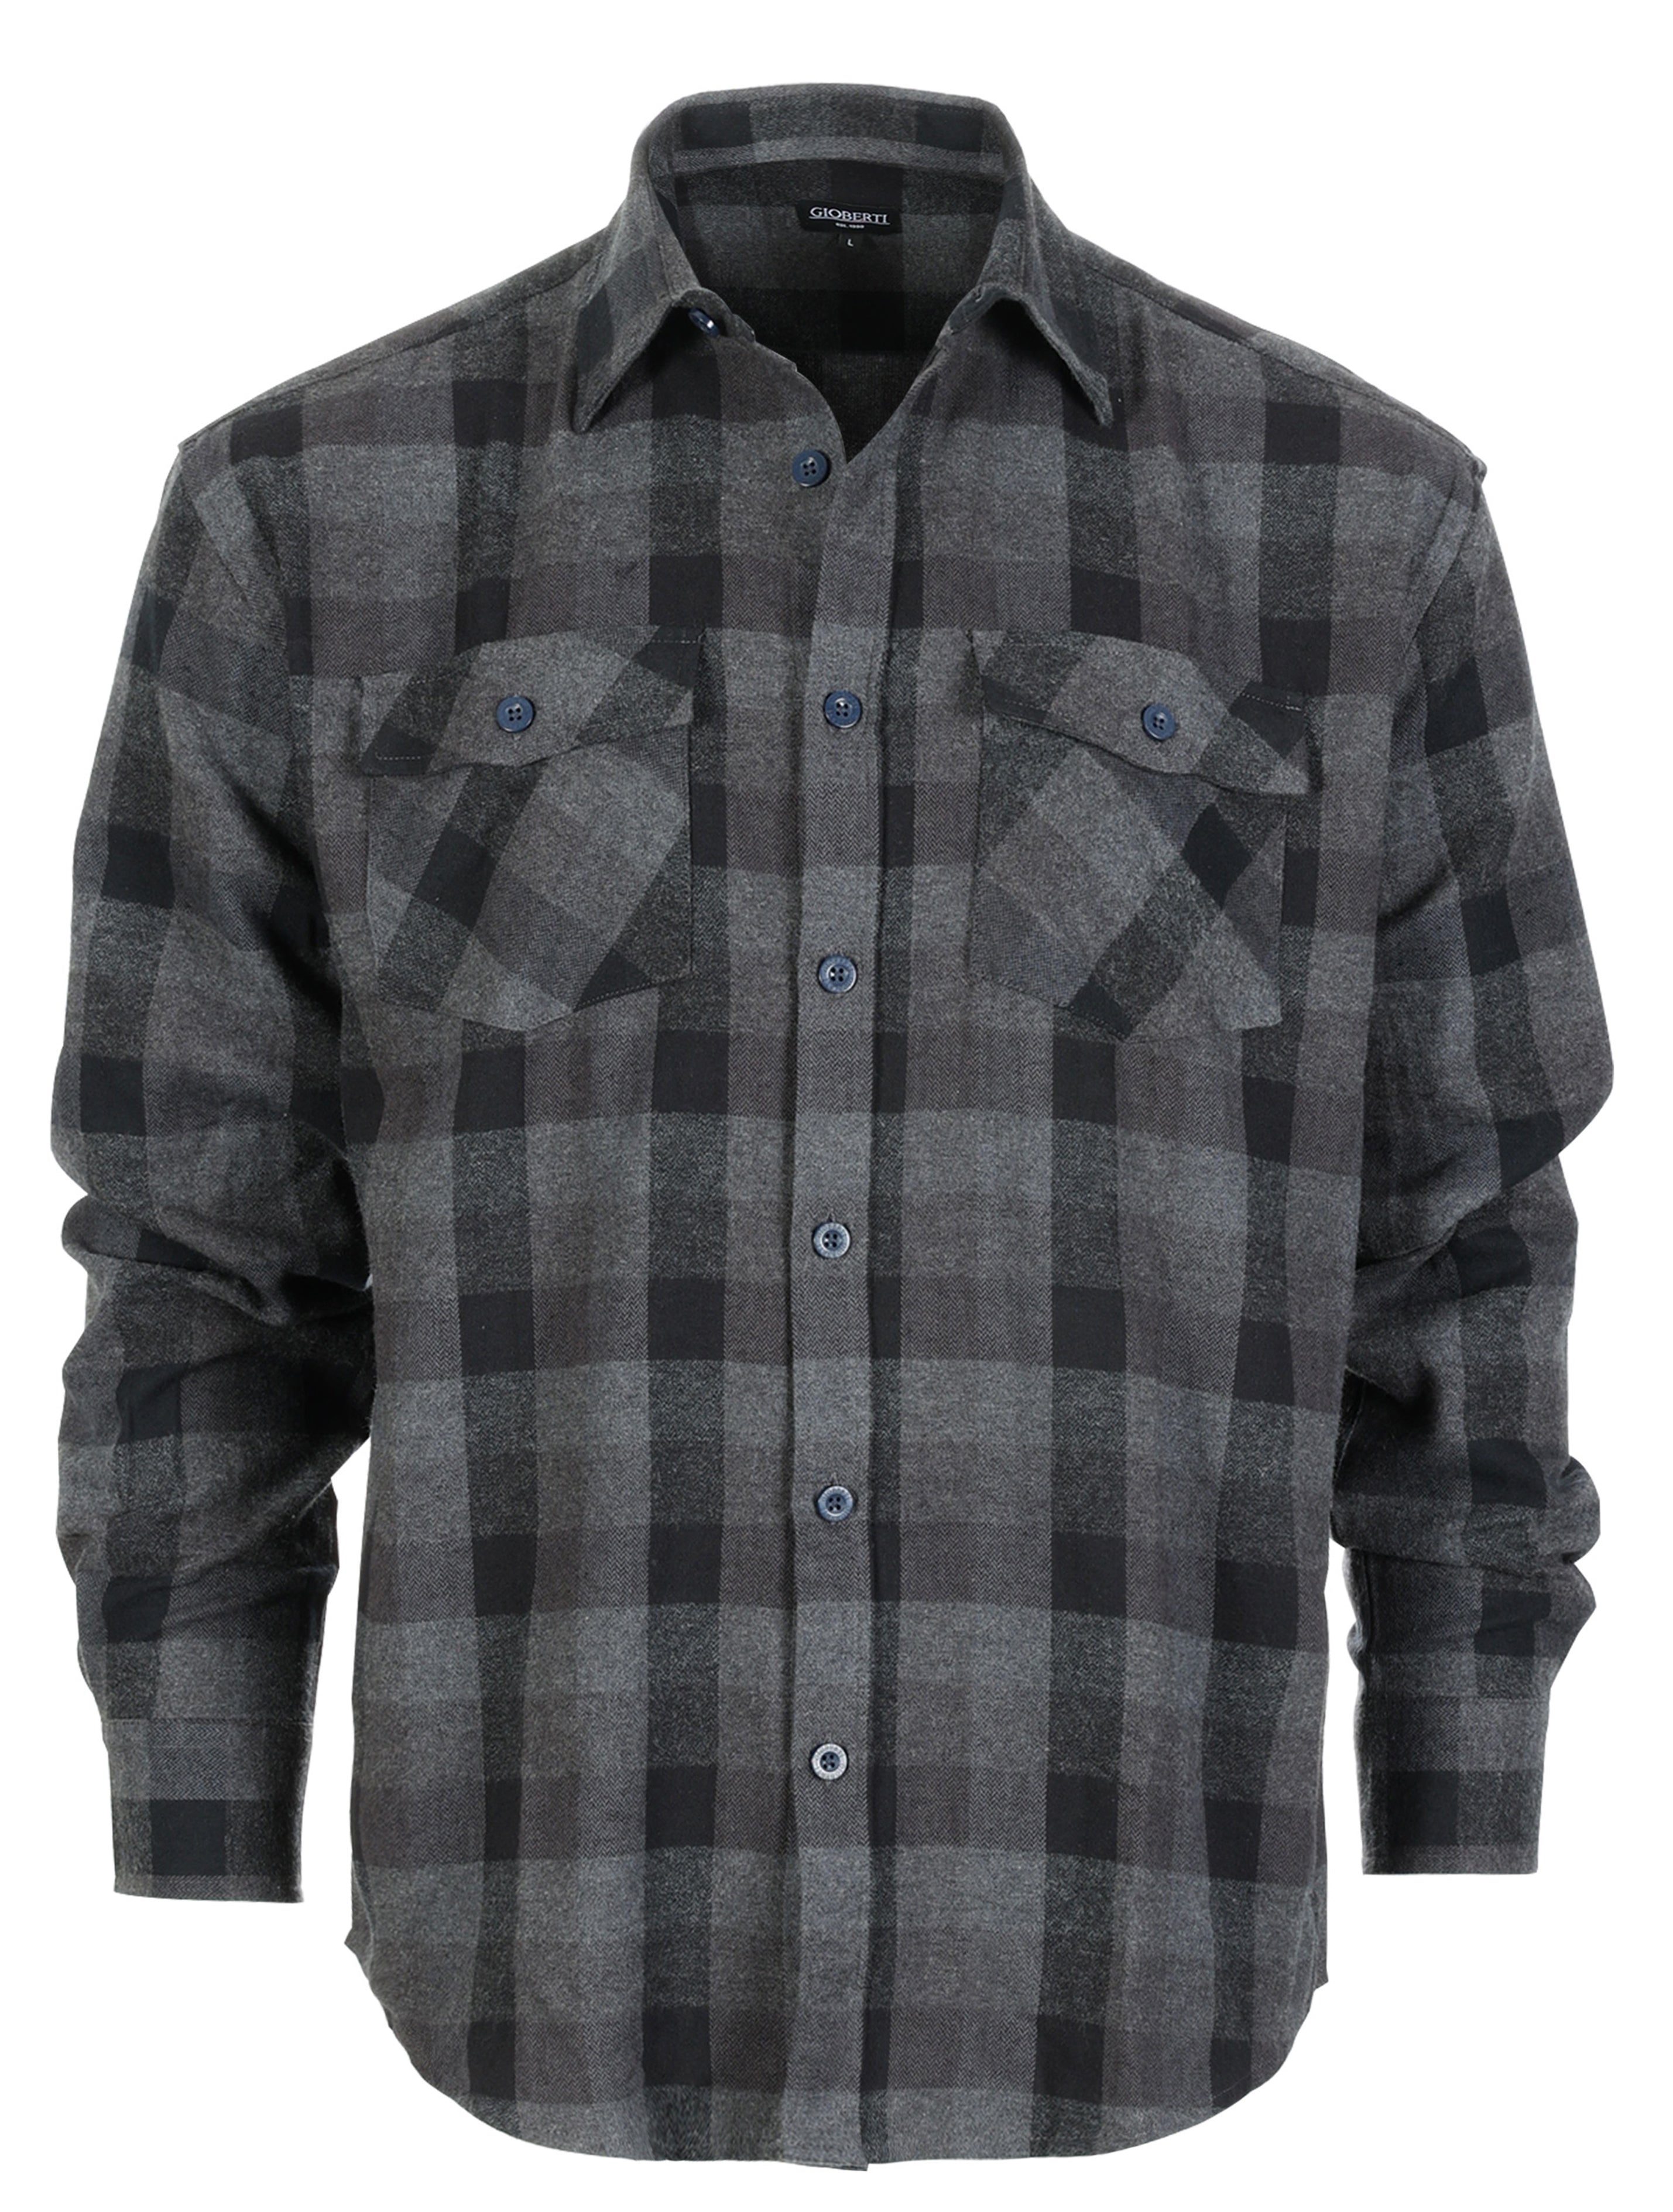 title:Gioberti Men's Charcoal / Black / Gray Plaid Checkered Brushed Flannel Shirt;color:Charcoal / Black / Gray